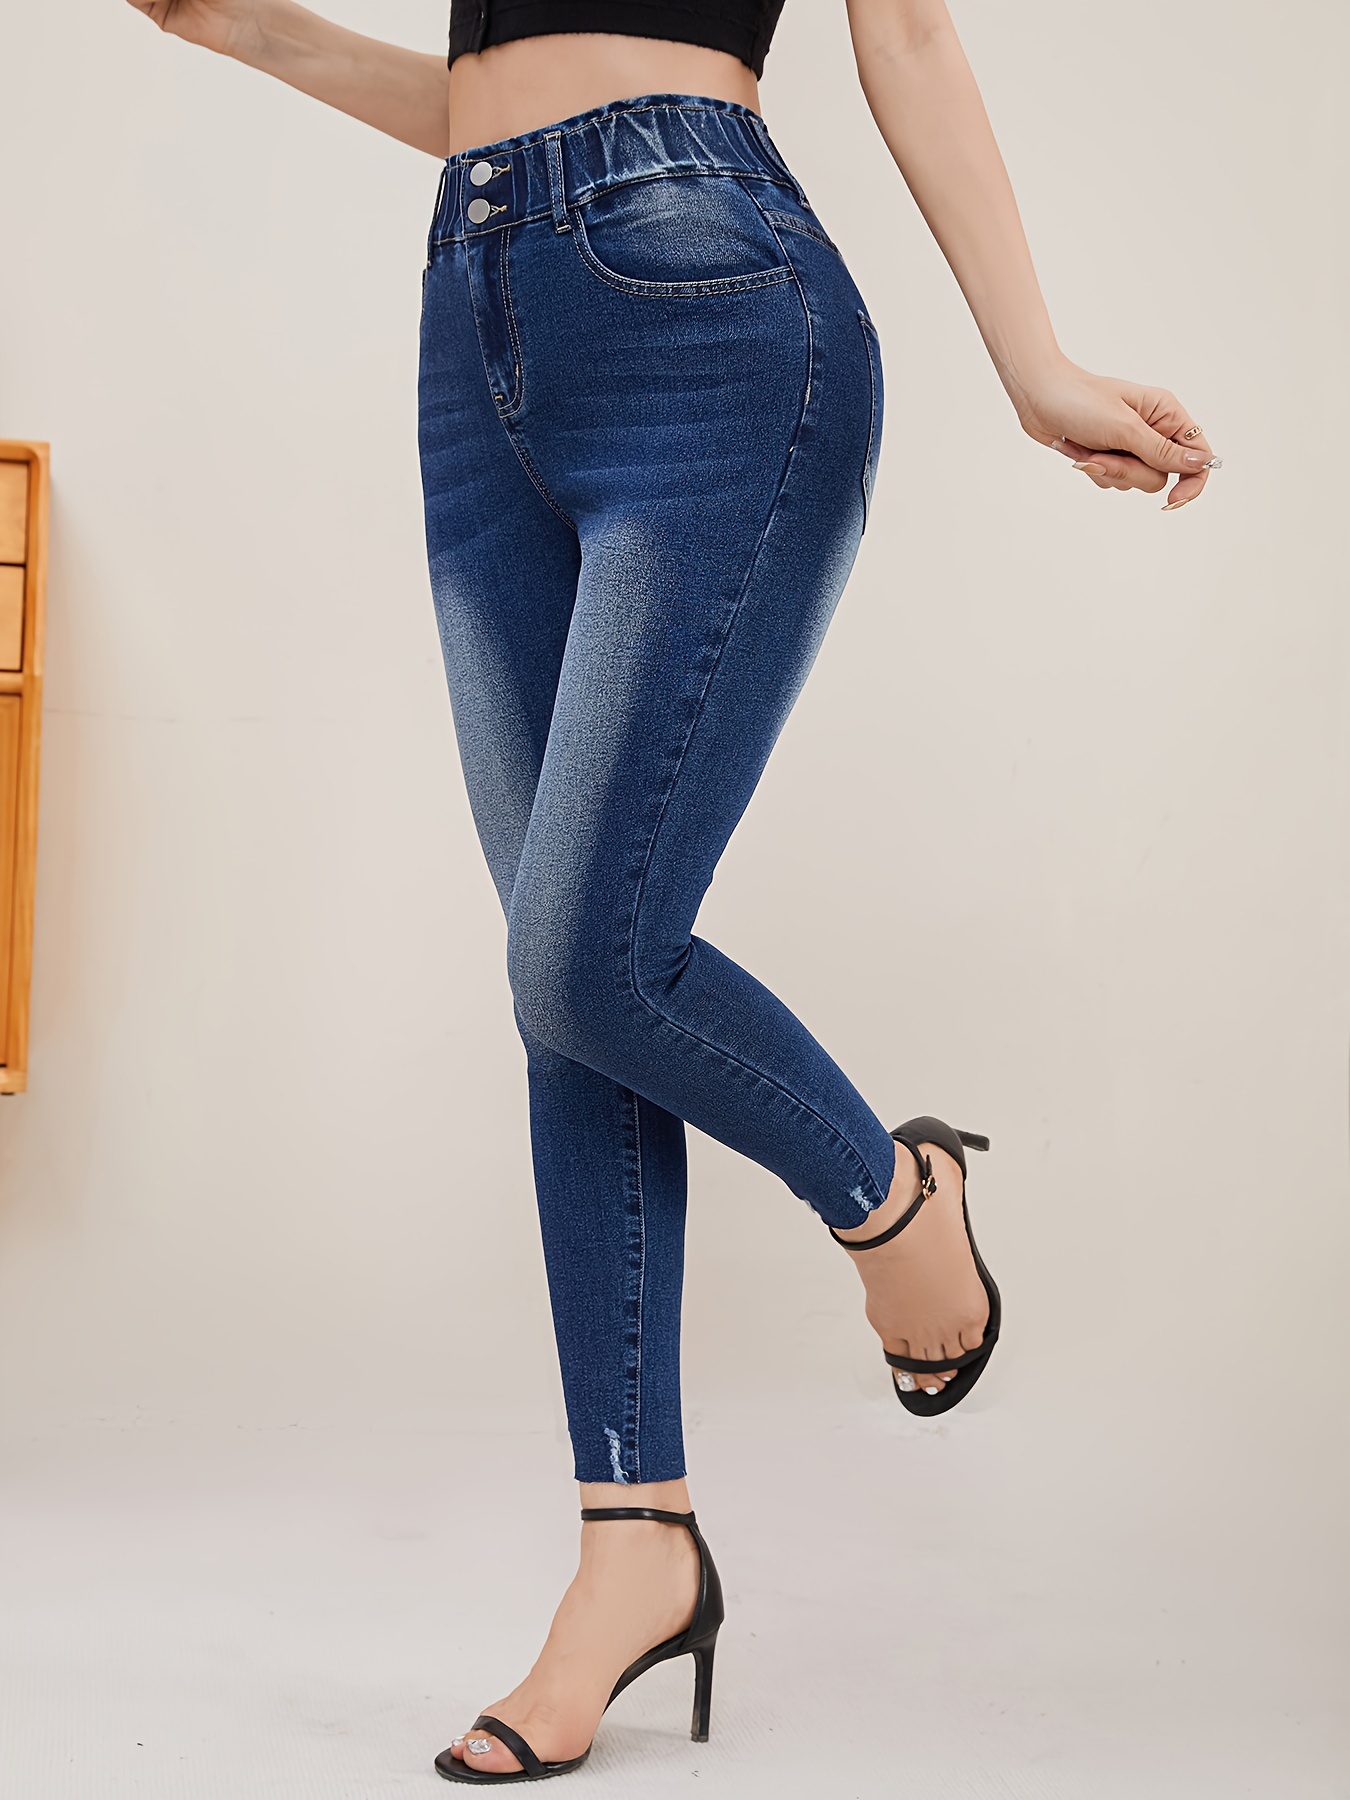 double buttons elastic waist skinny jeans high stretch fashion fitted denim pants with pocket womens denim jeans clothing